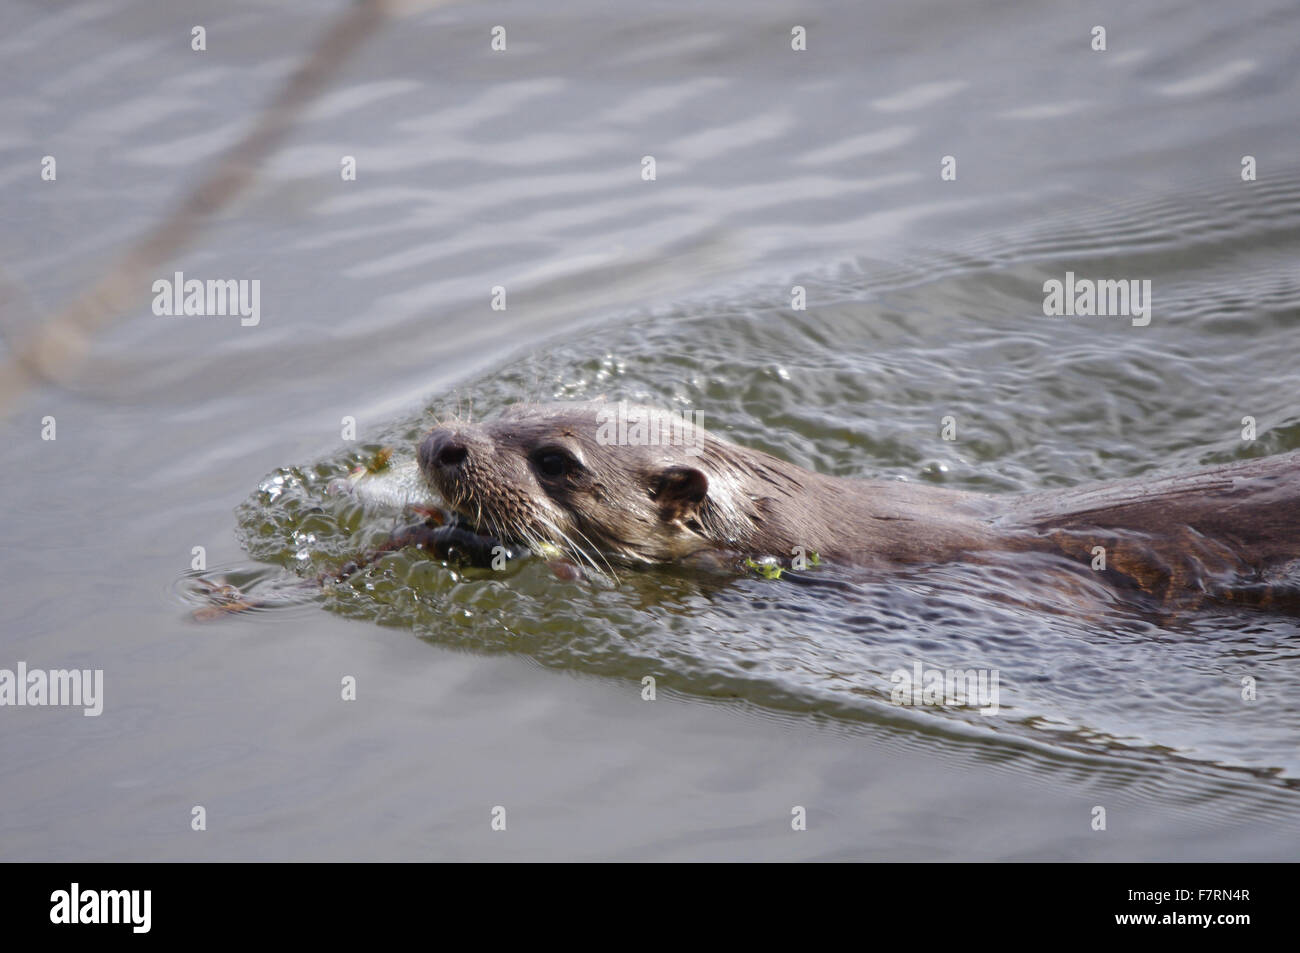 Otter, swimming on the surface of the water, with its catch of fish Stock Photo